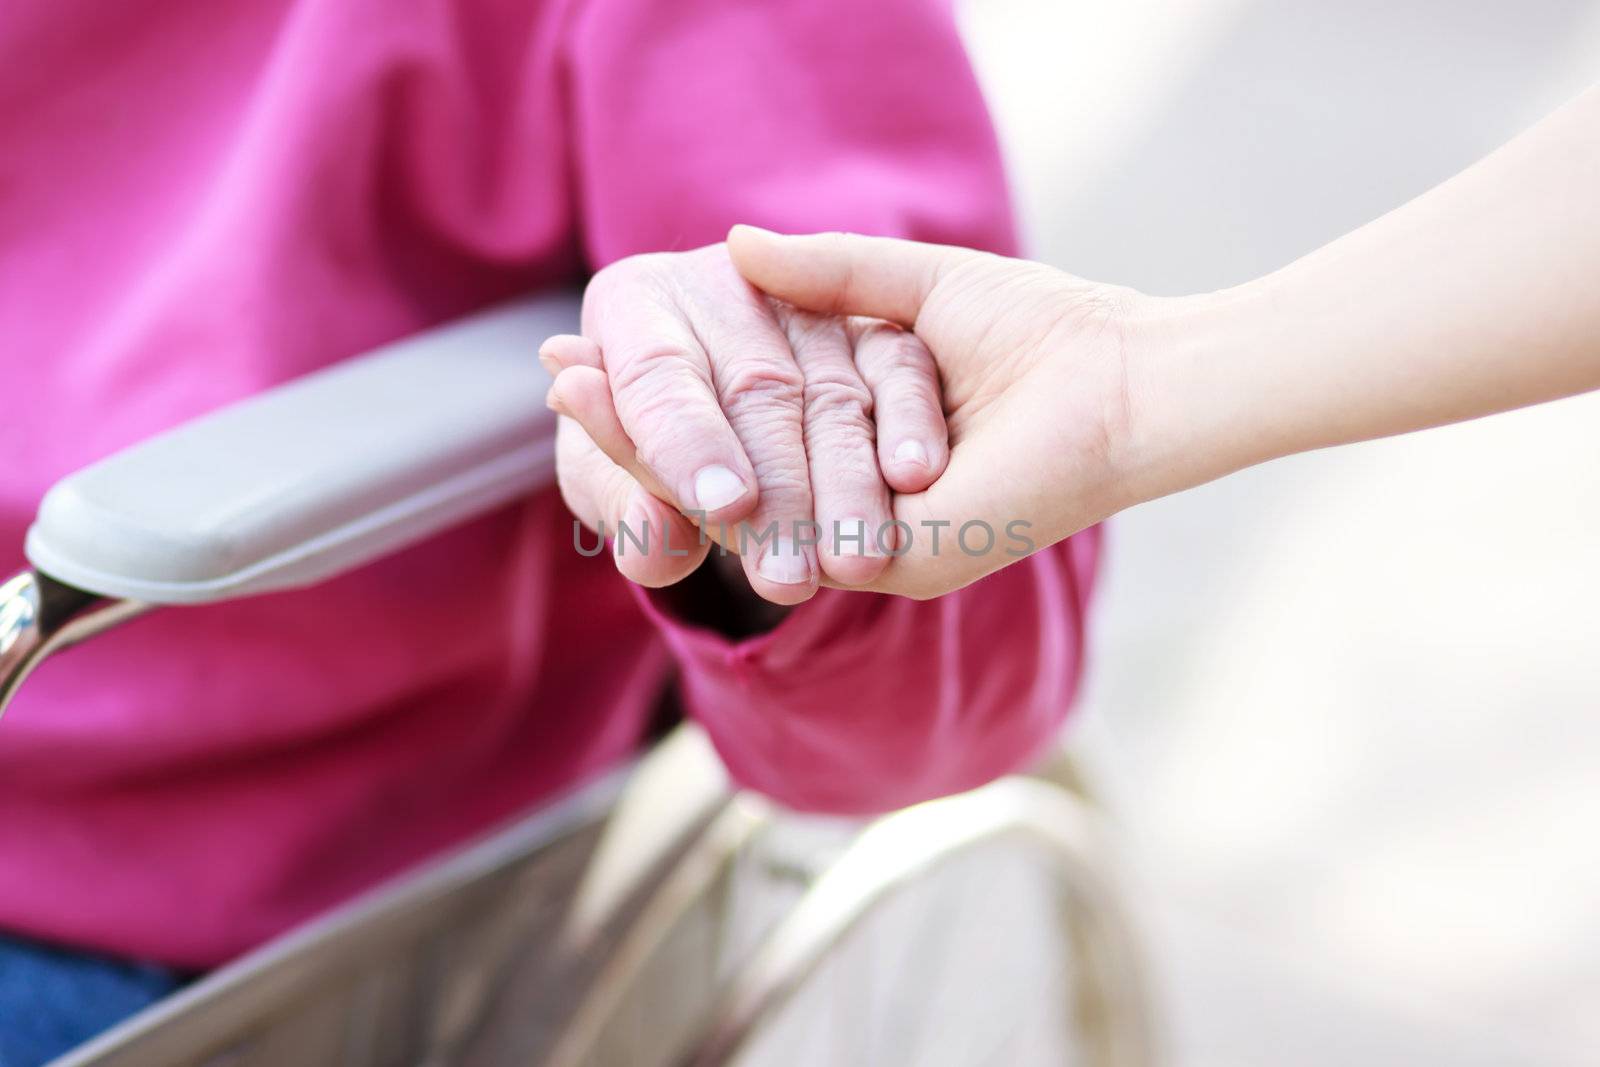 Senior Lady in Wheelchair Holding Hands with Caretaker